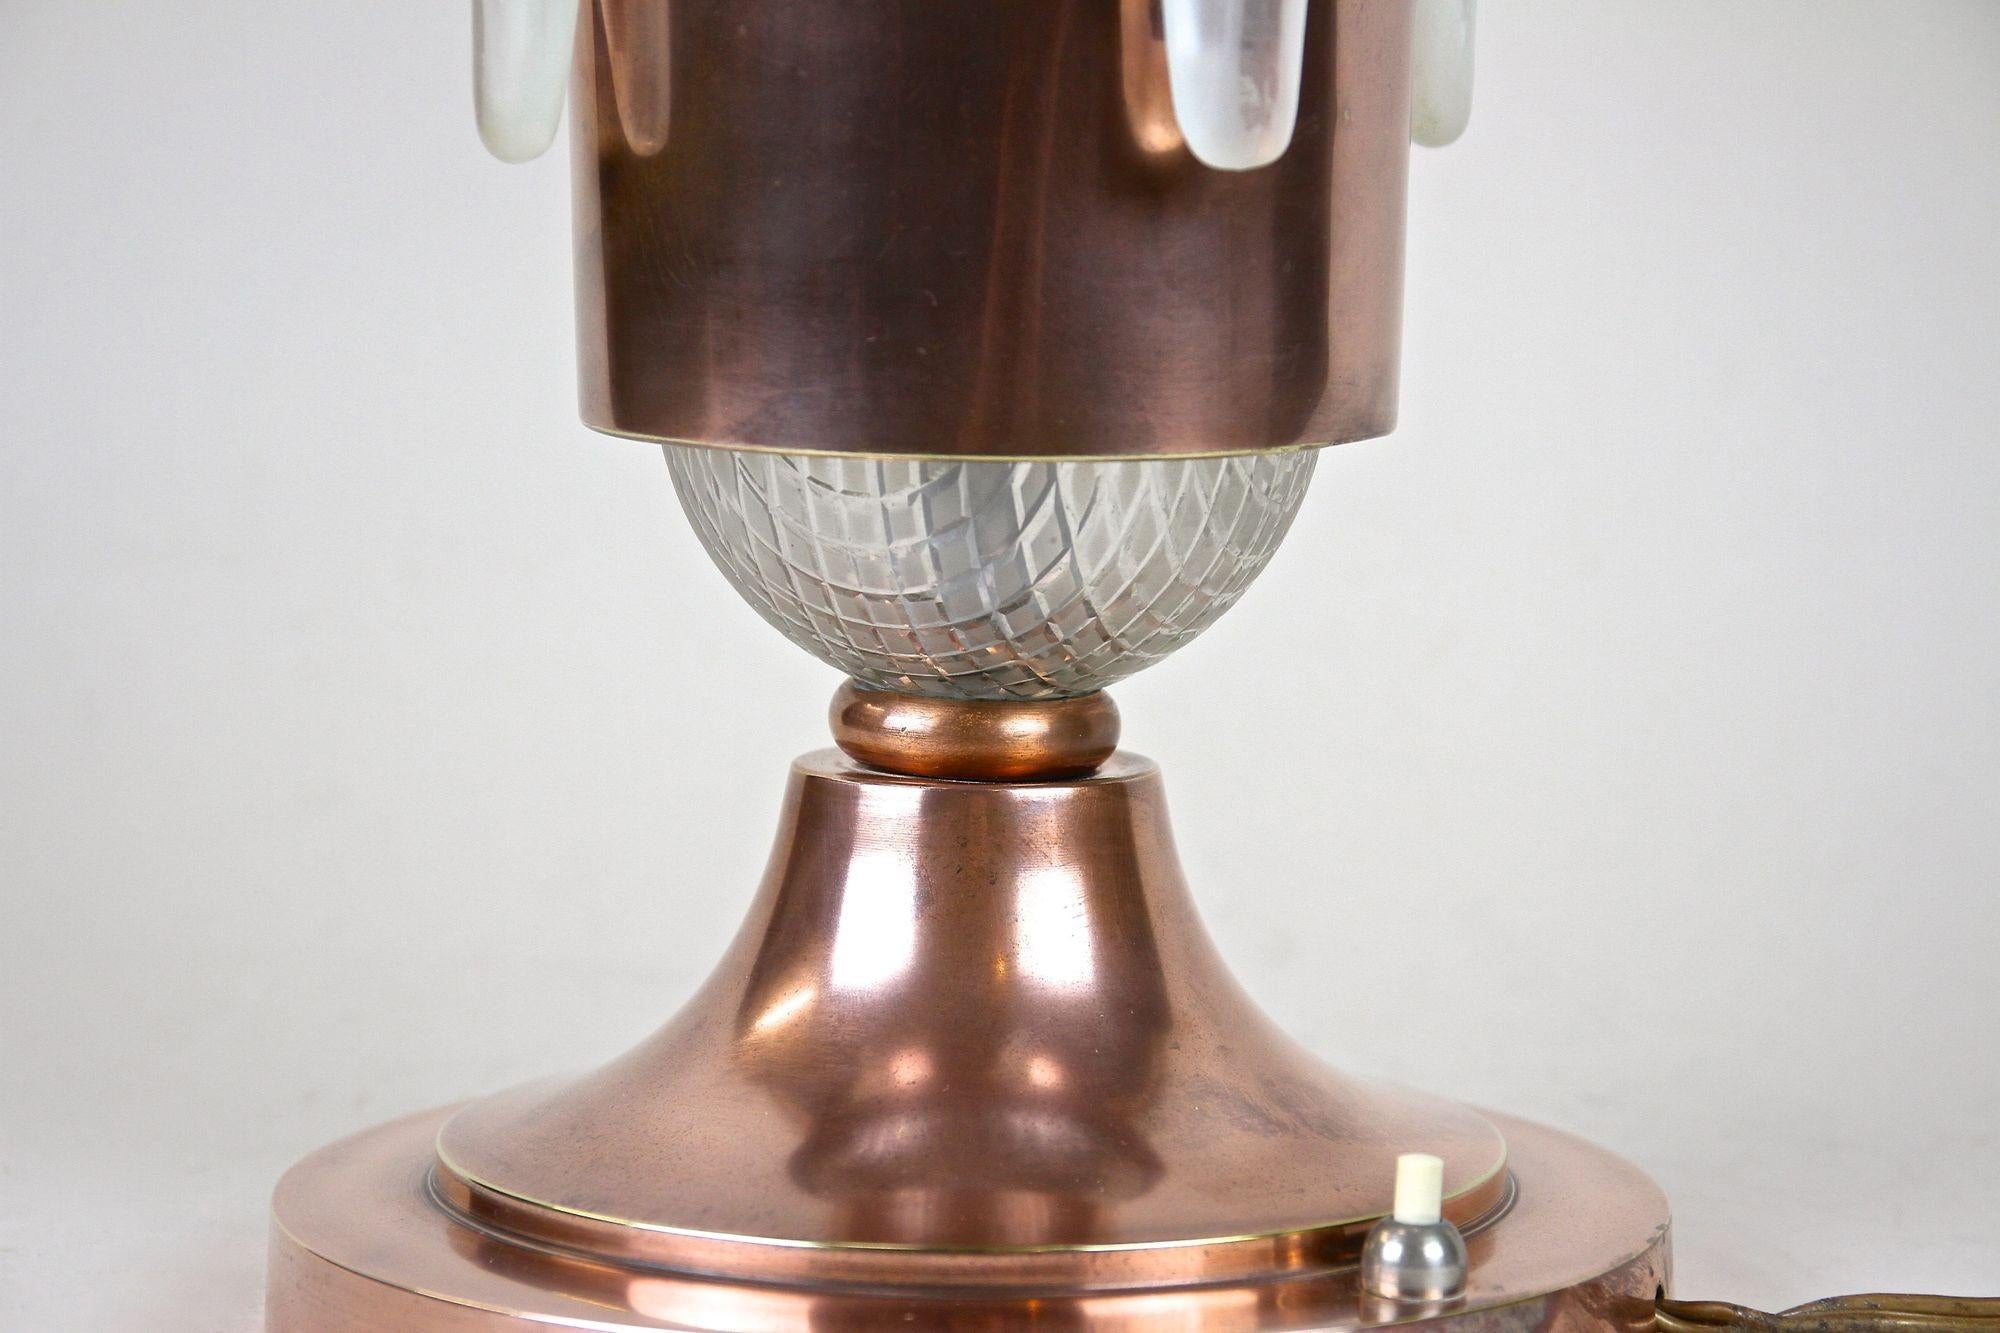 Art Deco Copper Table Lamp with Lalique Glass Elements, France, circa 1925 For Sale 4